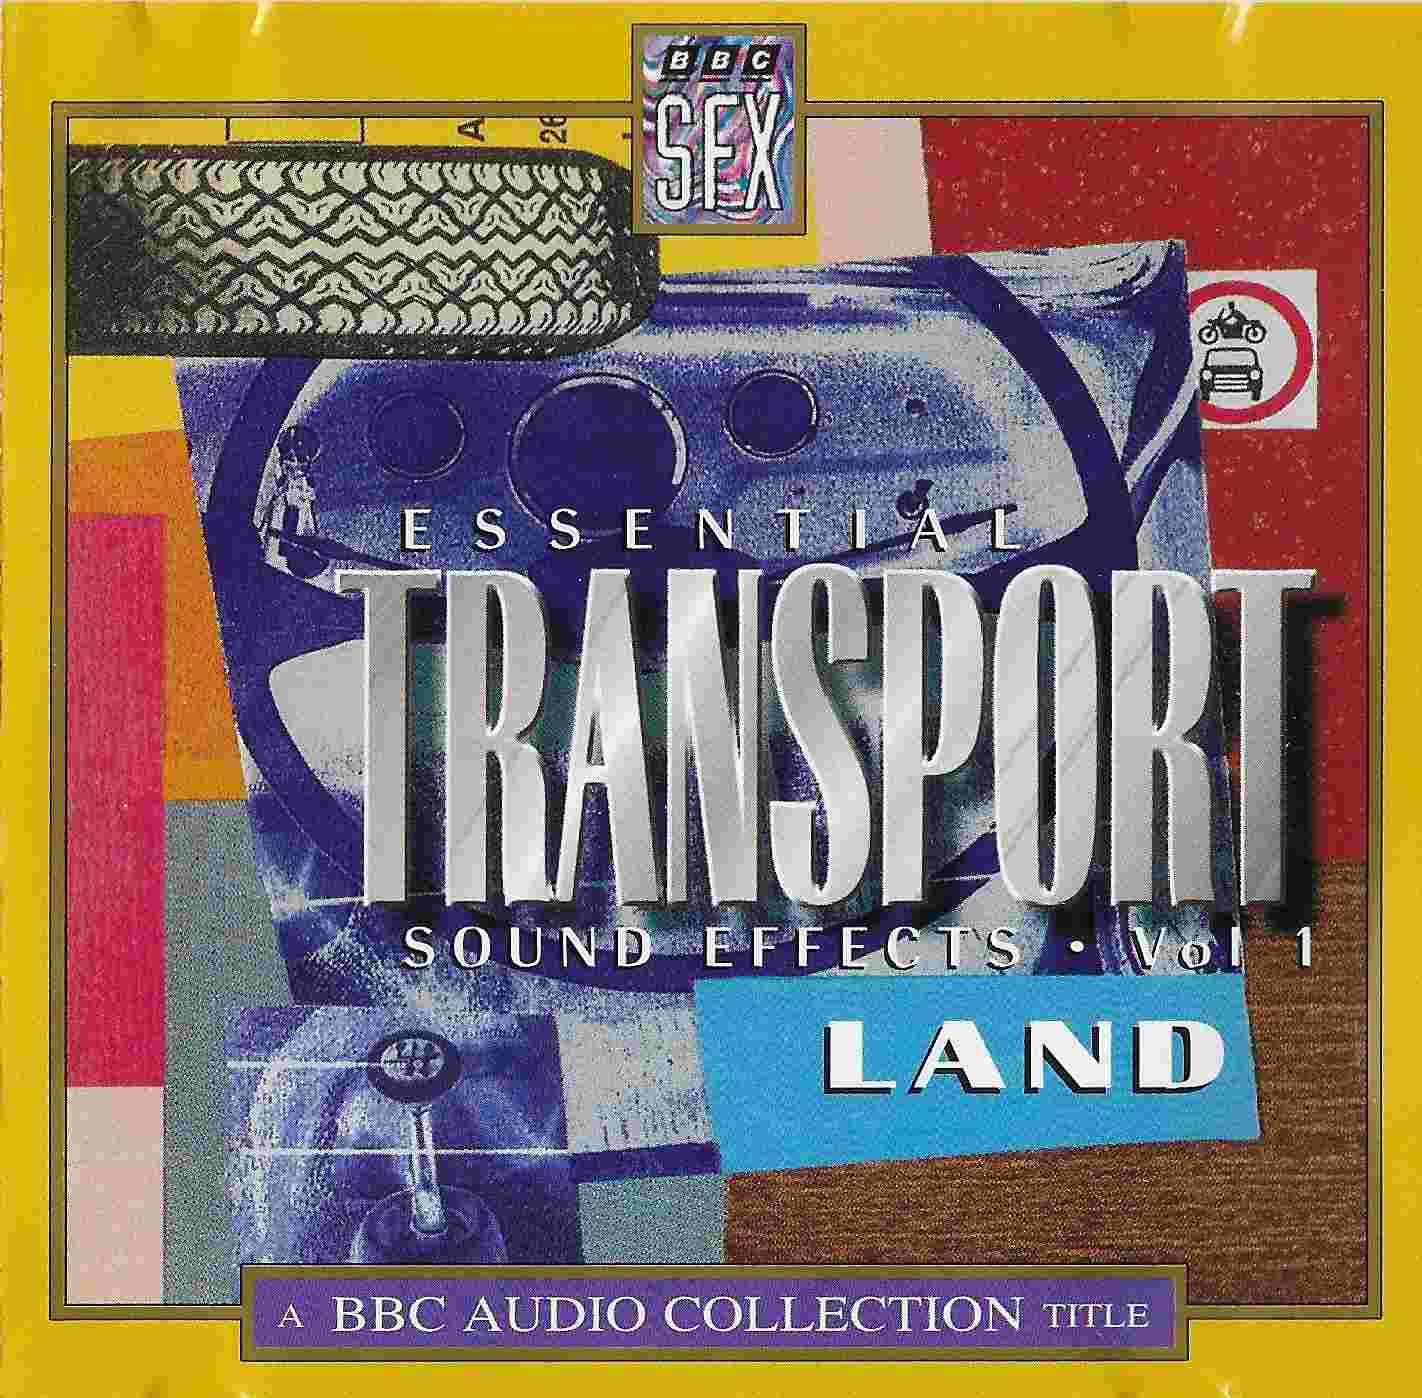 Picture of Essential transport sound effects - Volume 1 by artist Various from the BBC cds - Records and Tapes library